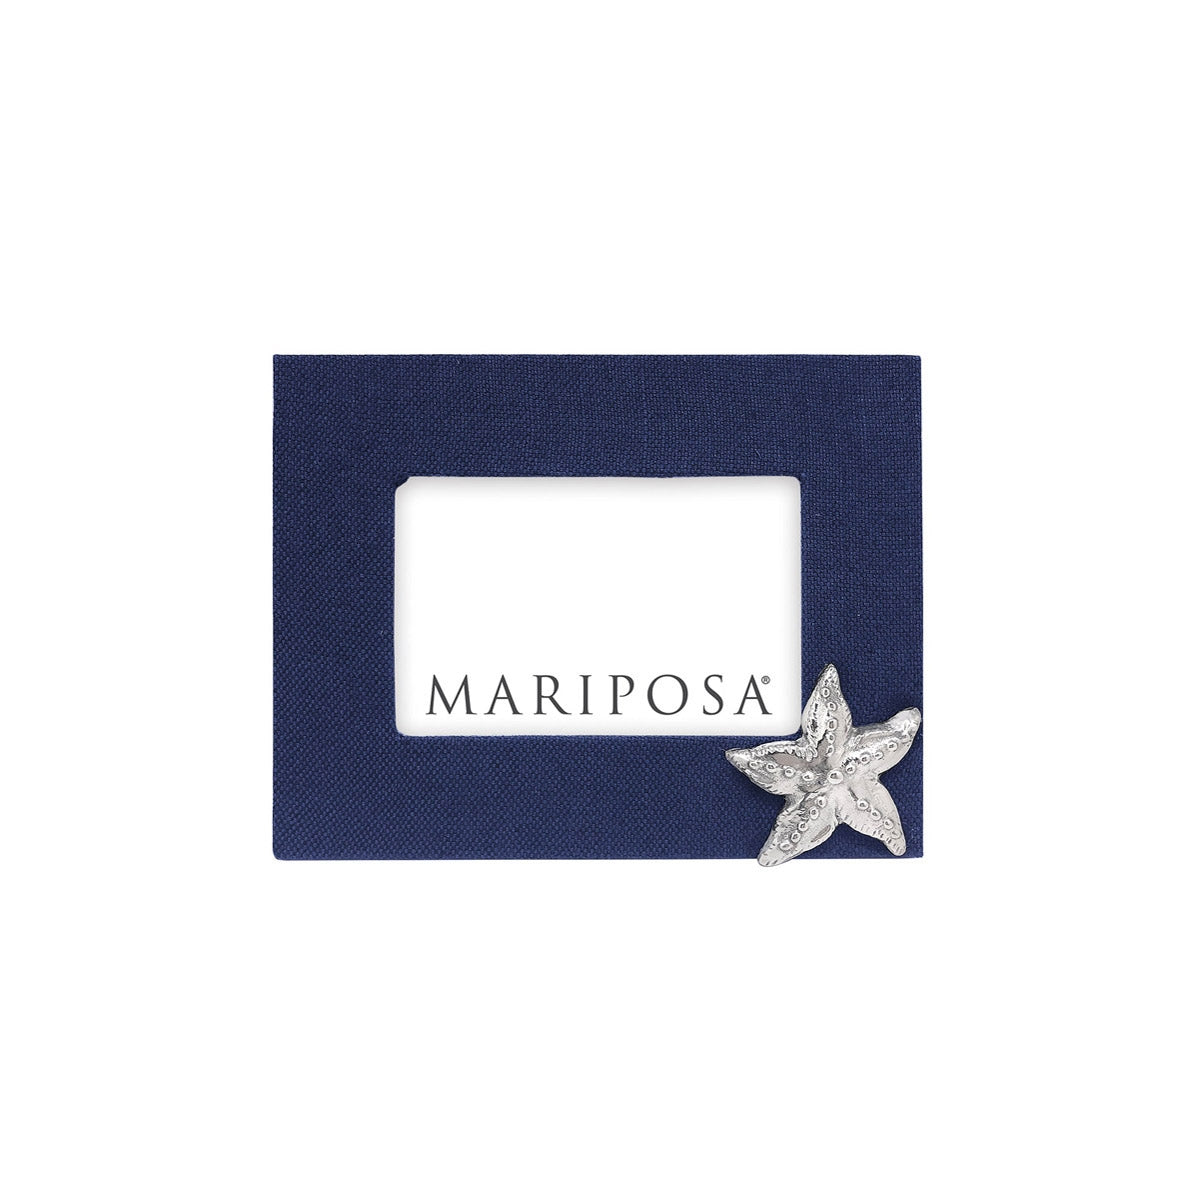 Mariposa Navy Blue Linen with Starfish Icon 4x6 Frame